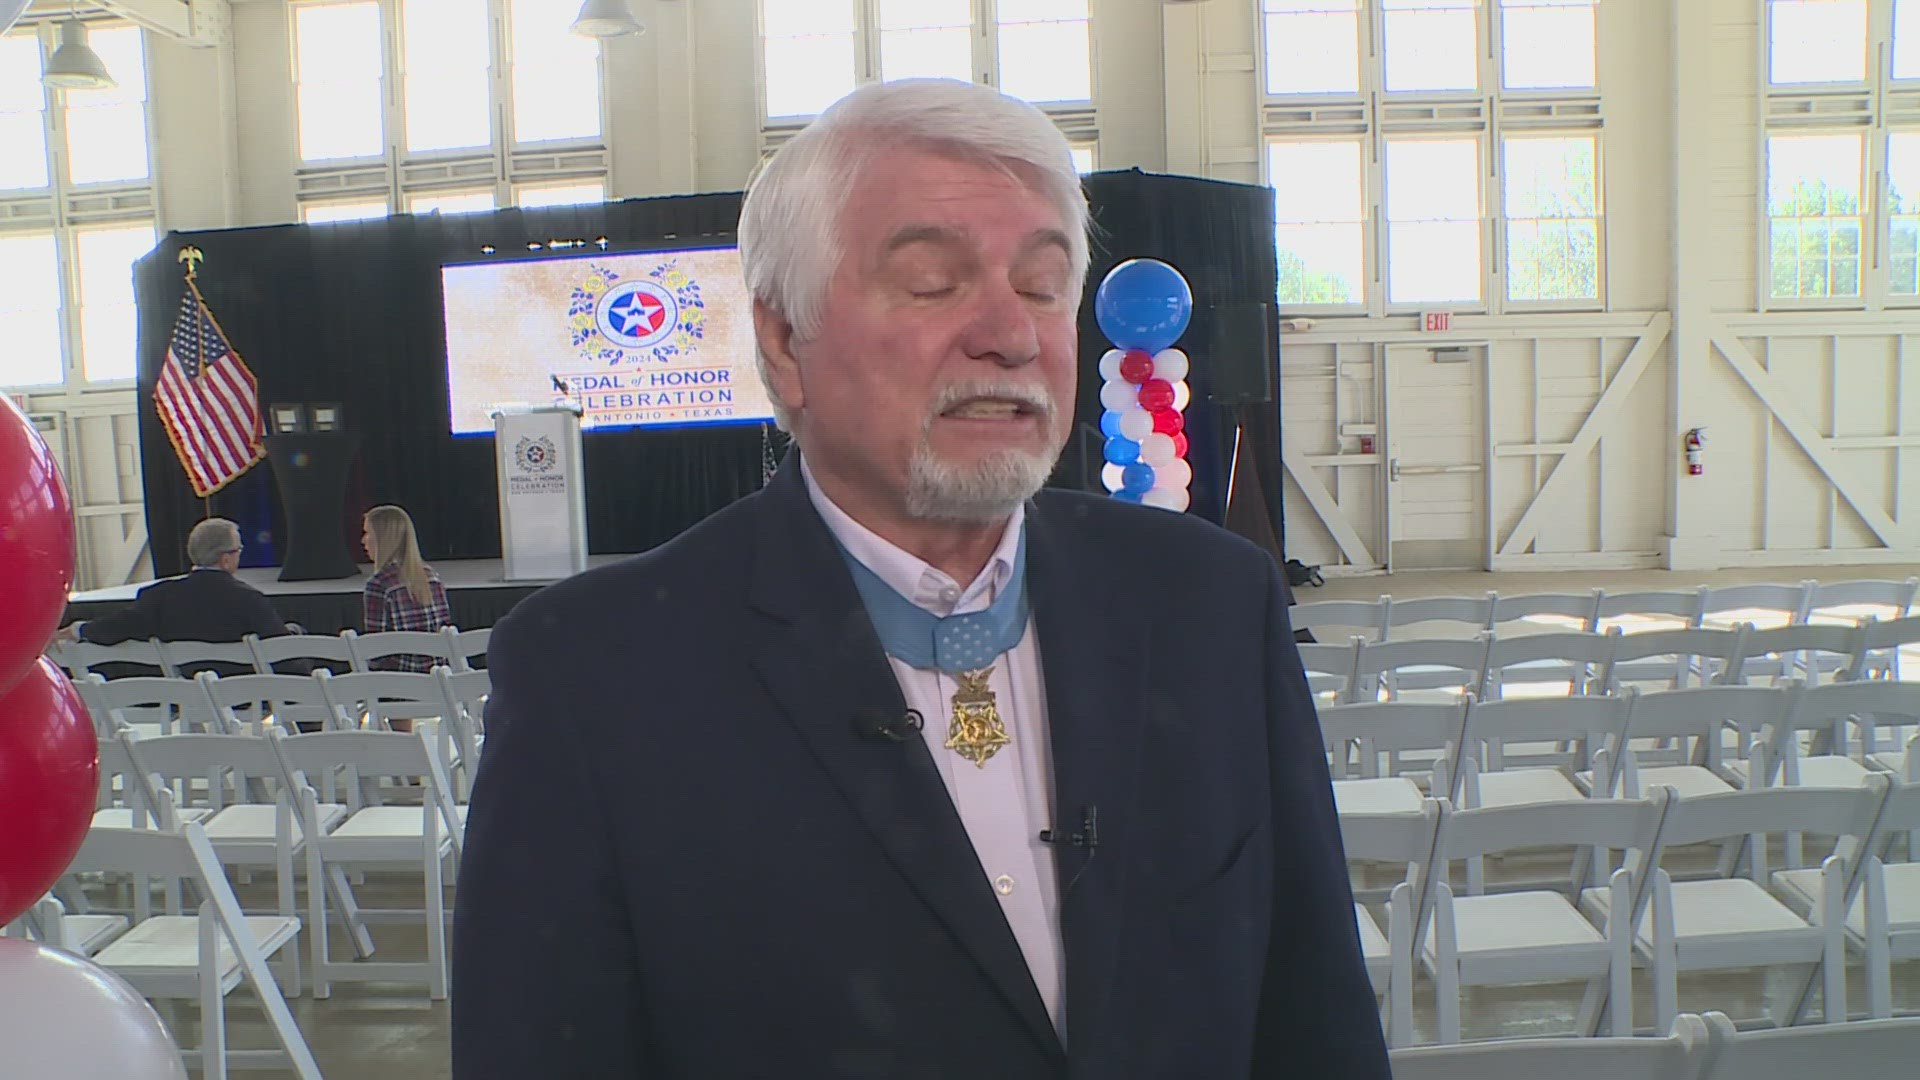 San Antonio will host some of our nation's greatest heroes this fall. The Congressional Medal of Honor Society will be holding its conference and celebration here.